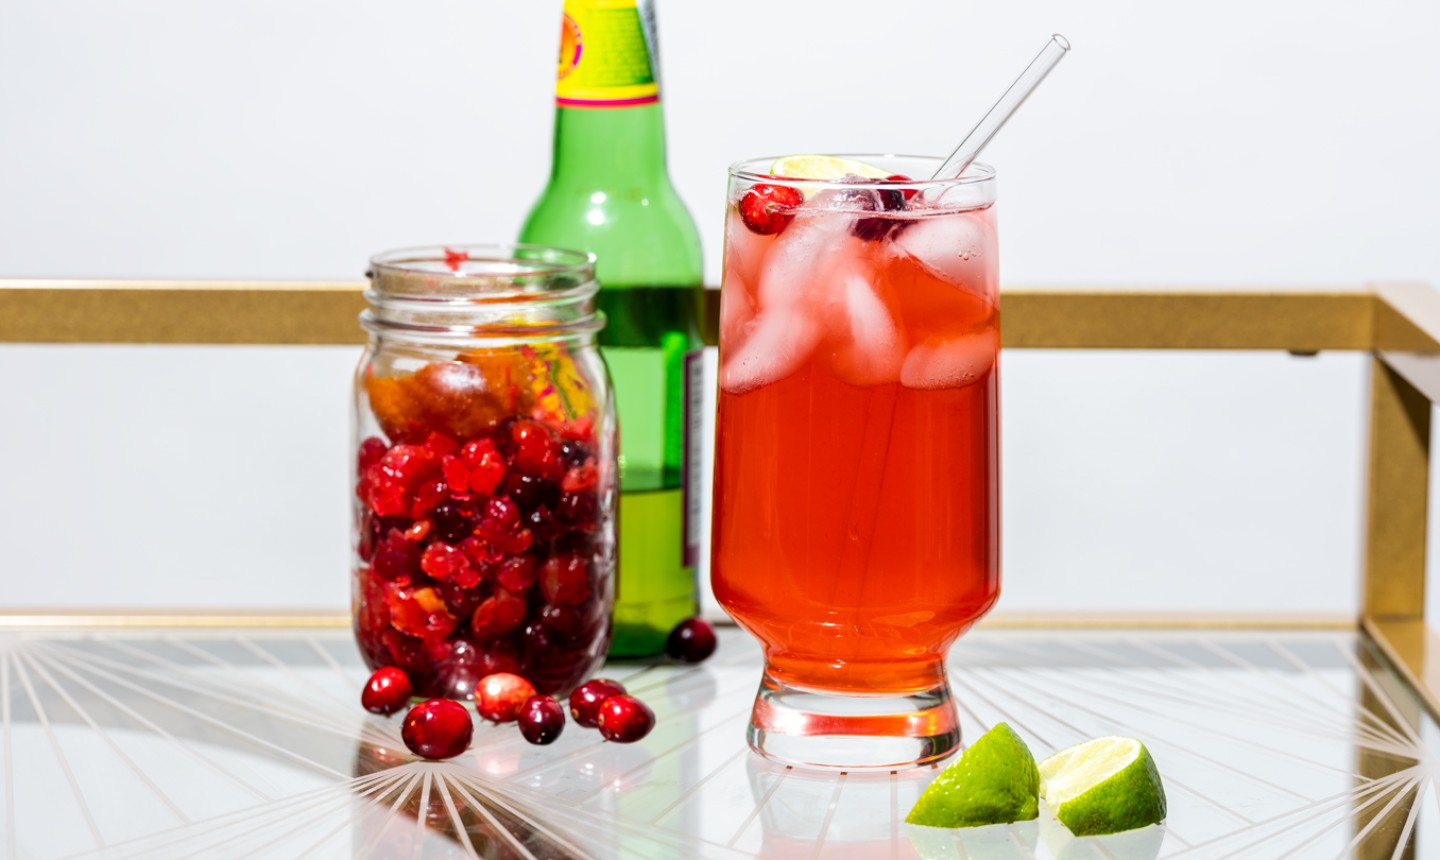 cranberry moscow mule